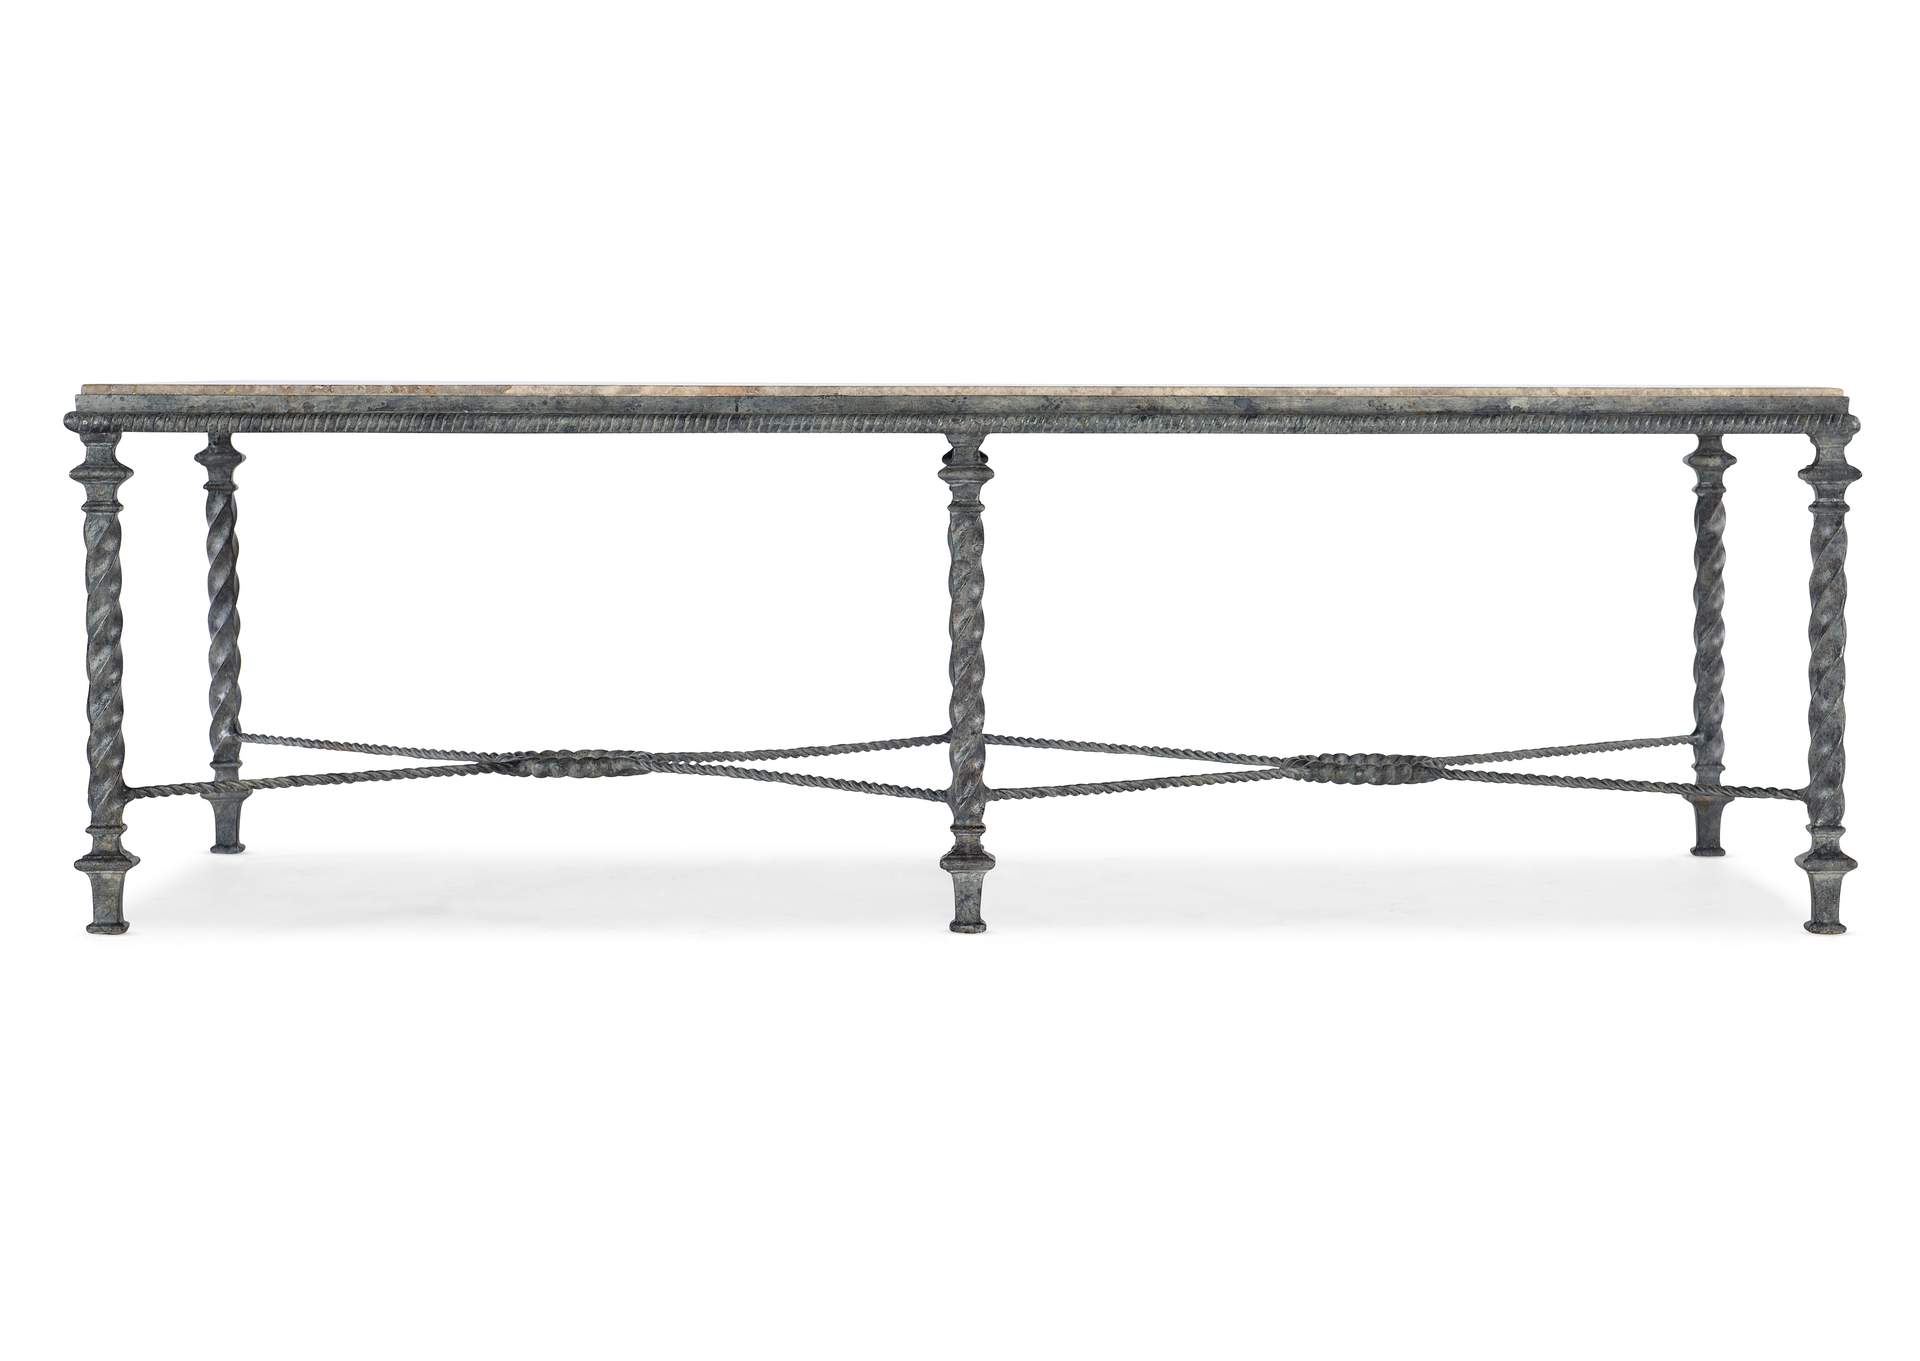 Traditions Rectangle Cocktail Table,Hooker Furniture